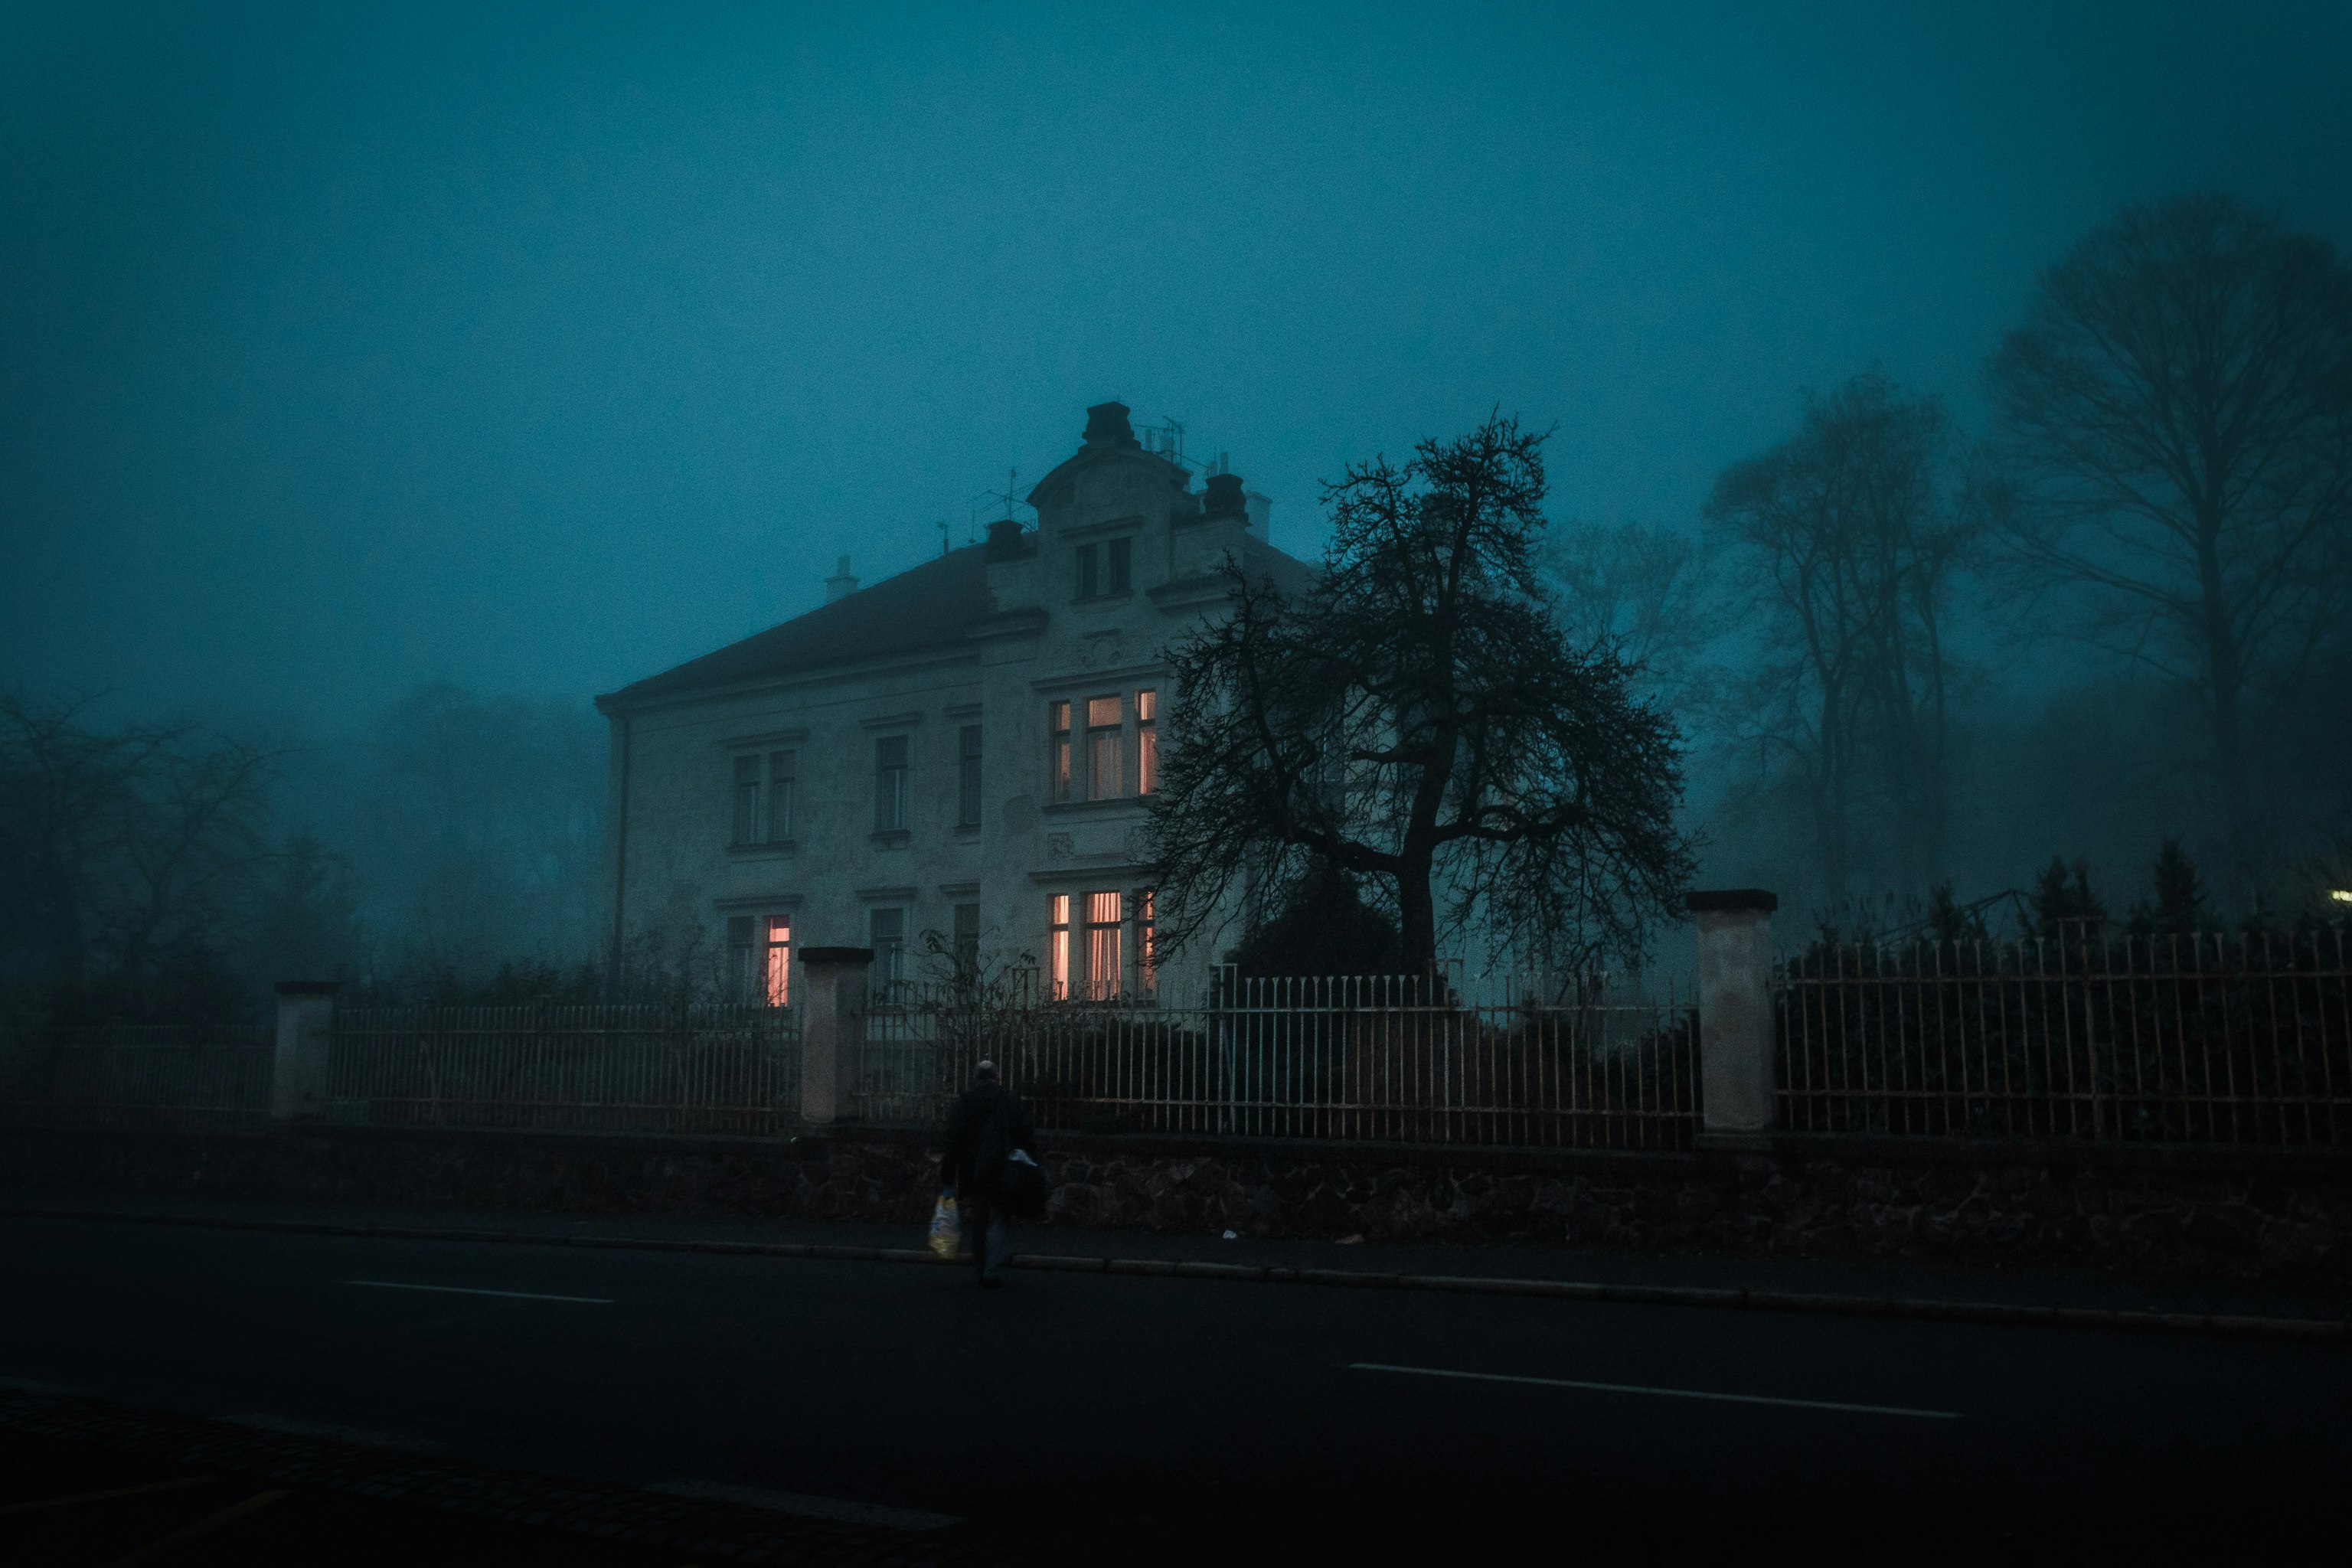 There is a huge psychiatric ward in the north of Prague, Czech Republic. On the outskirts of this vast area there are houses for ordinary people, one of them being this house where one of my friends was born and raised.